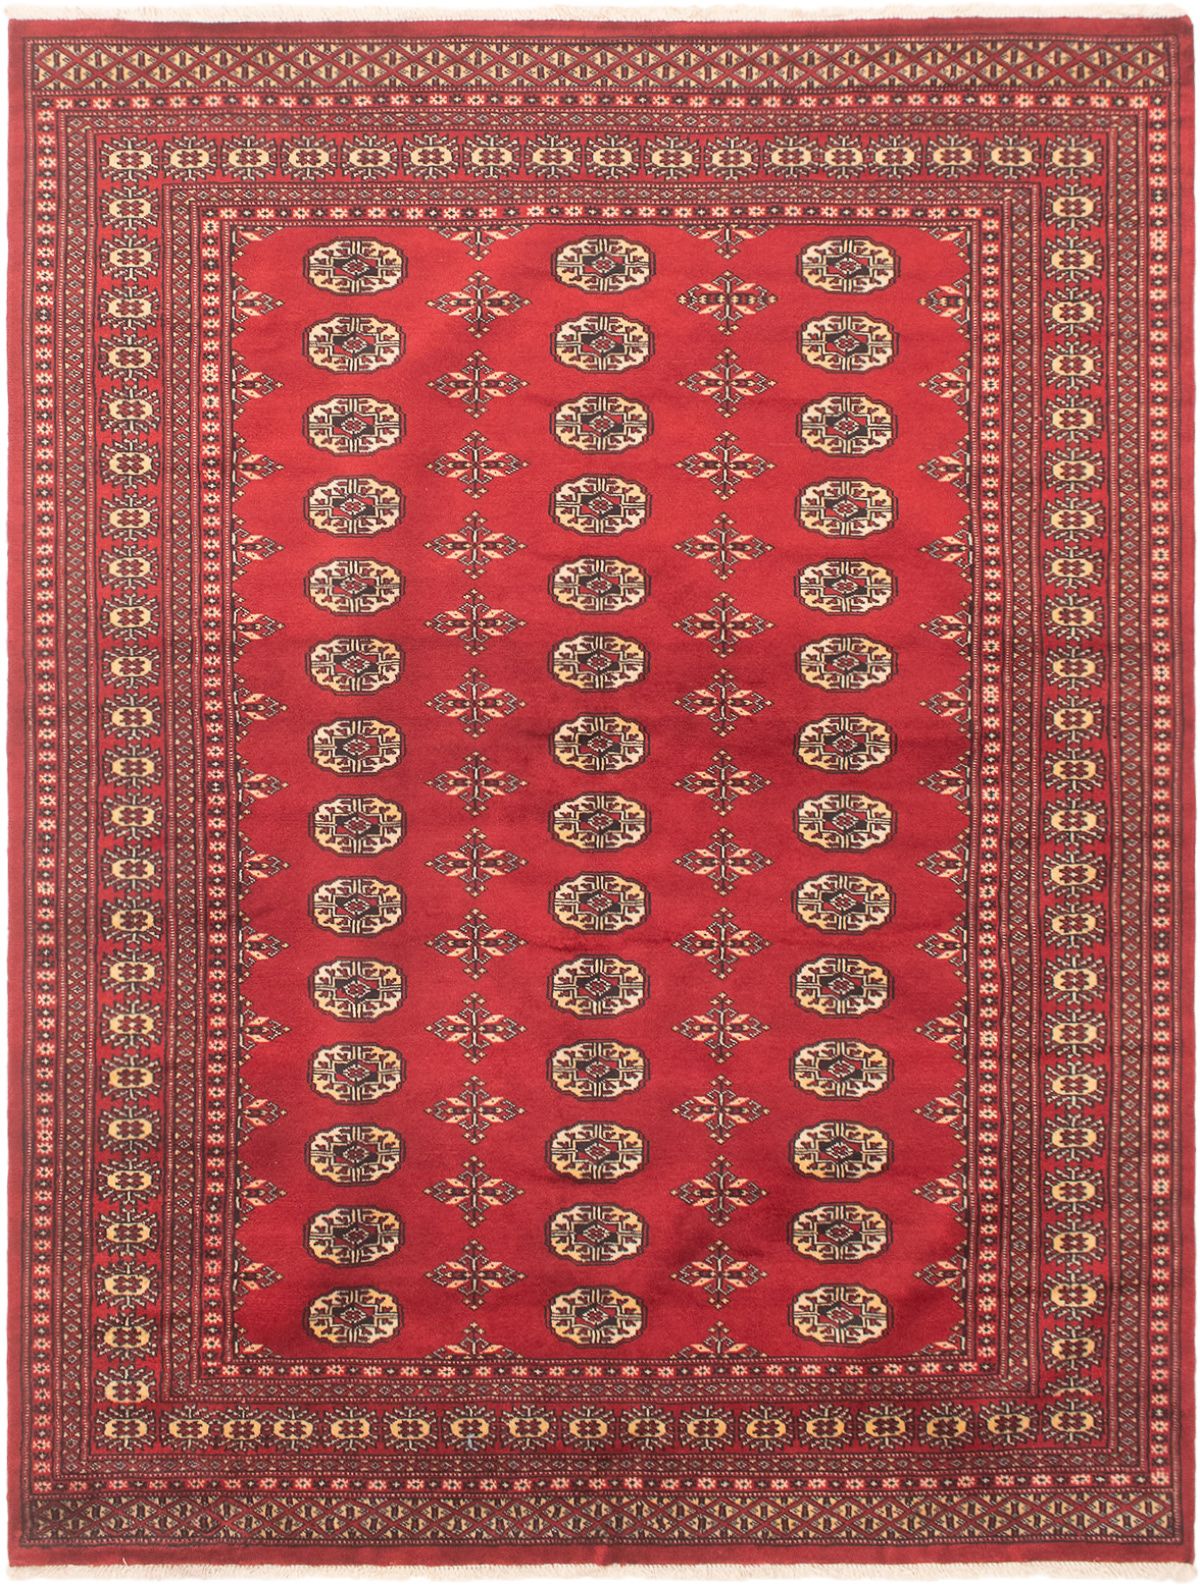 Hand-knotted Finest Peshawar Bokhara Red Wool Rug 5'11" x 7'9" Size: 5'11" x 7'9"  